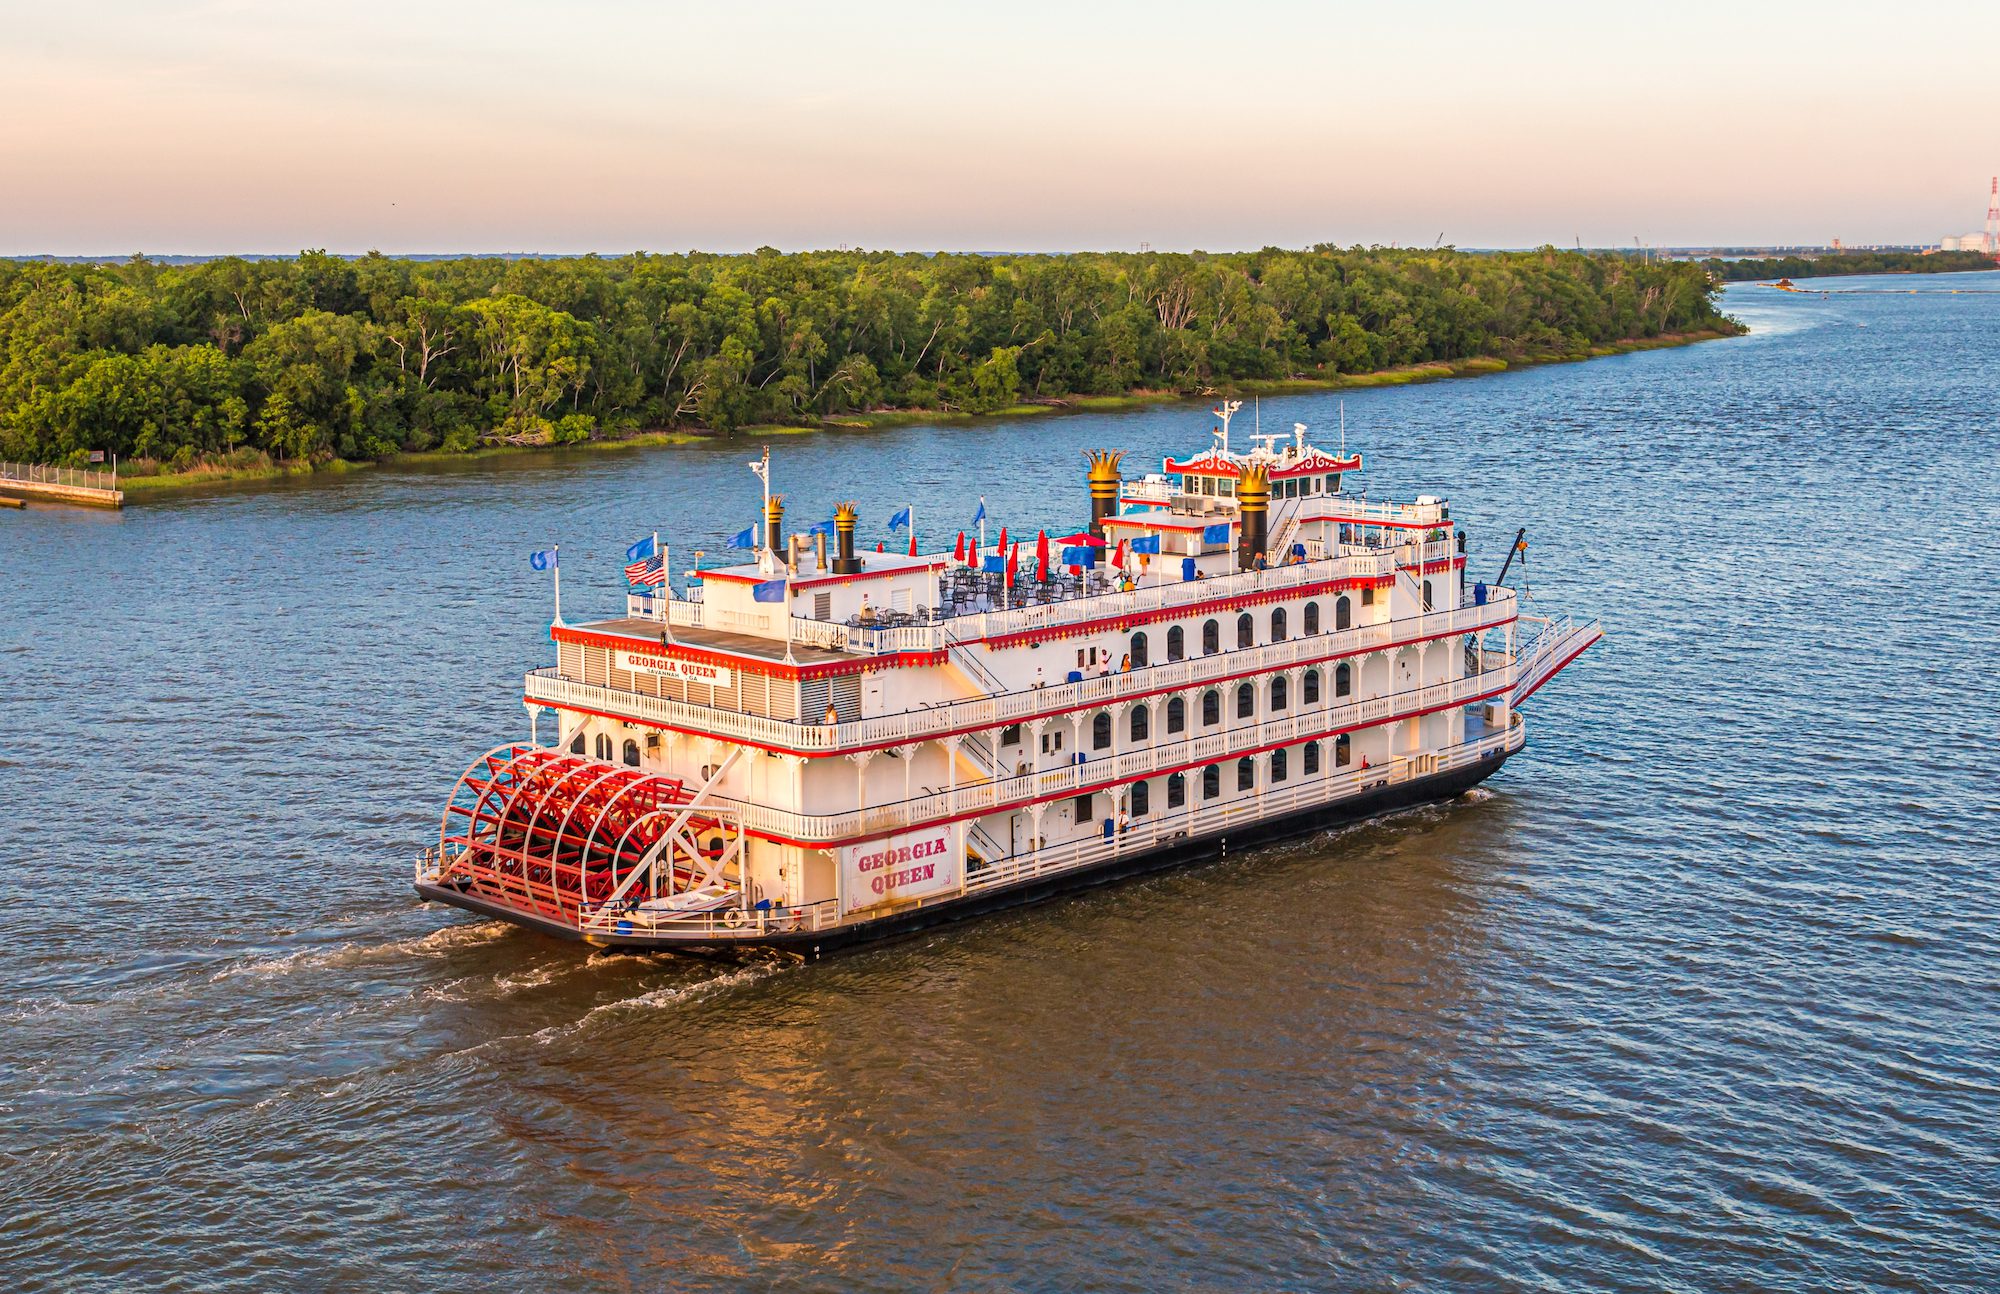 American Queen Voyages paddle steamer sailing on the river